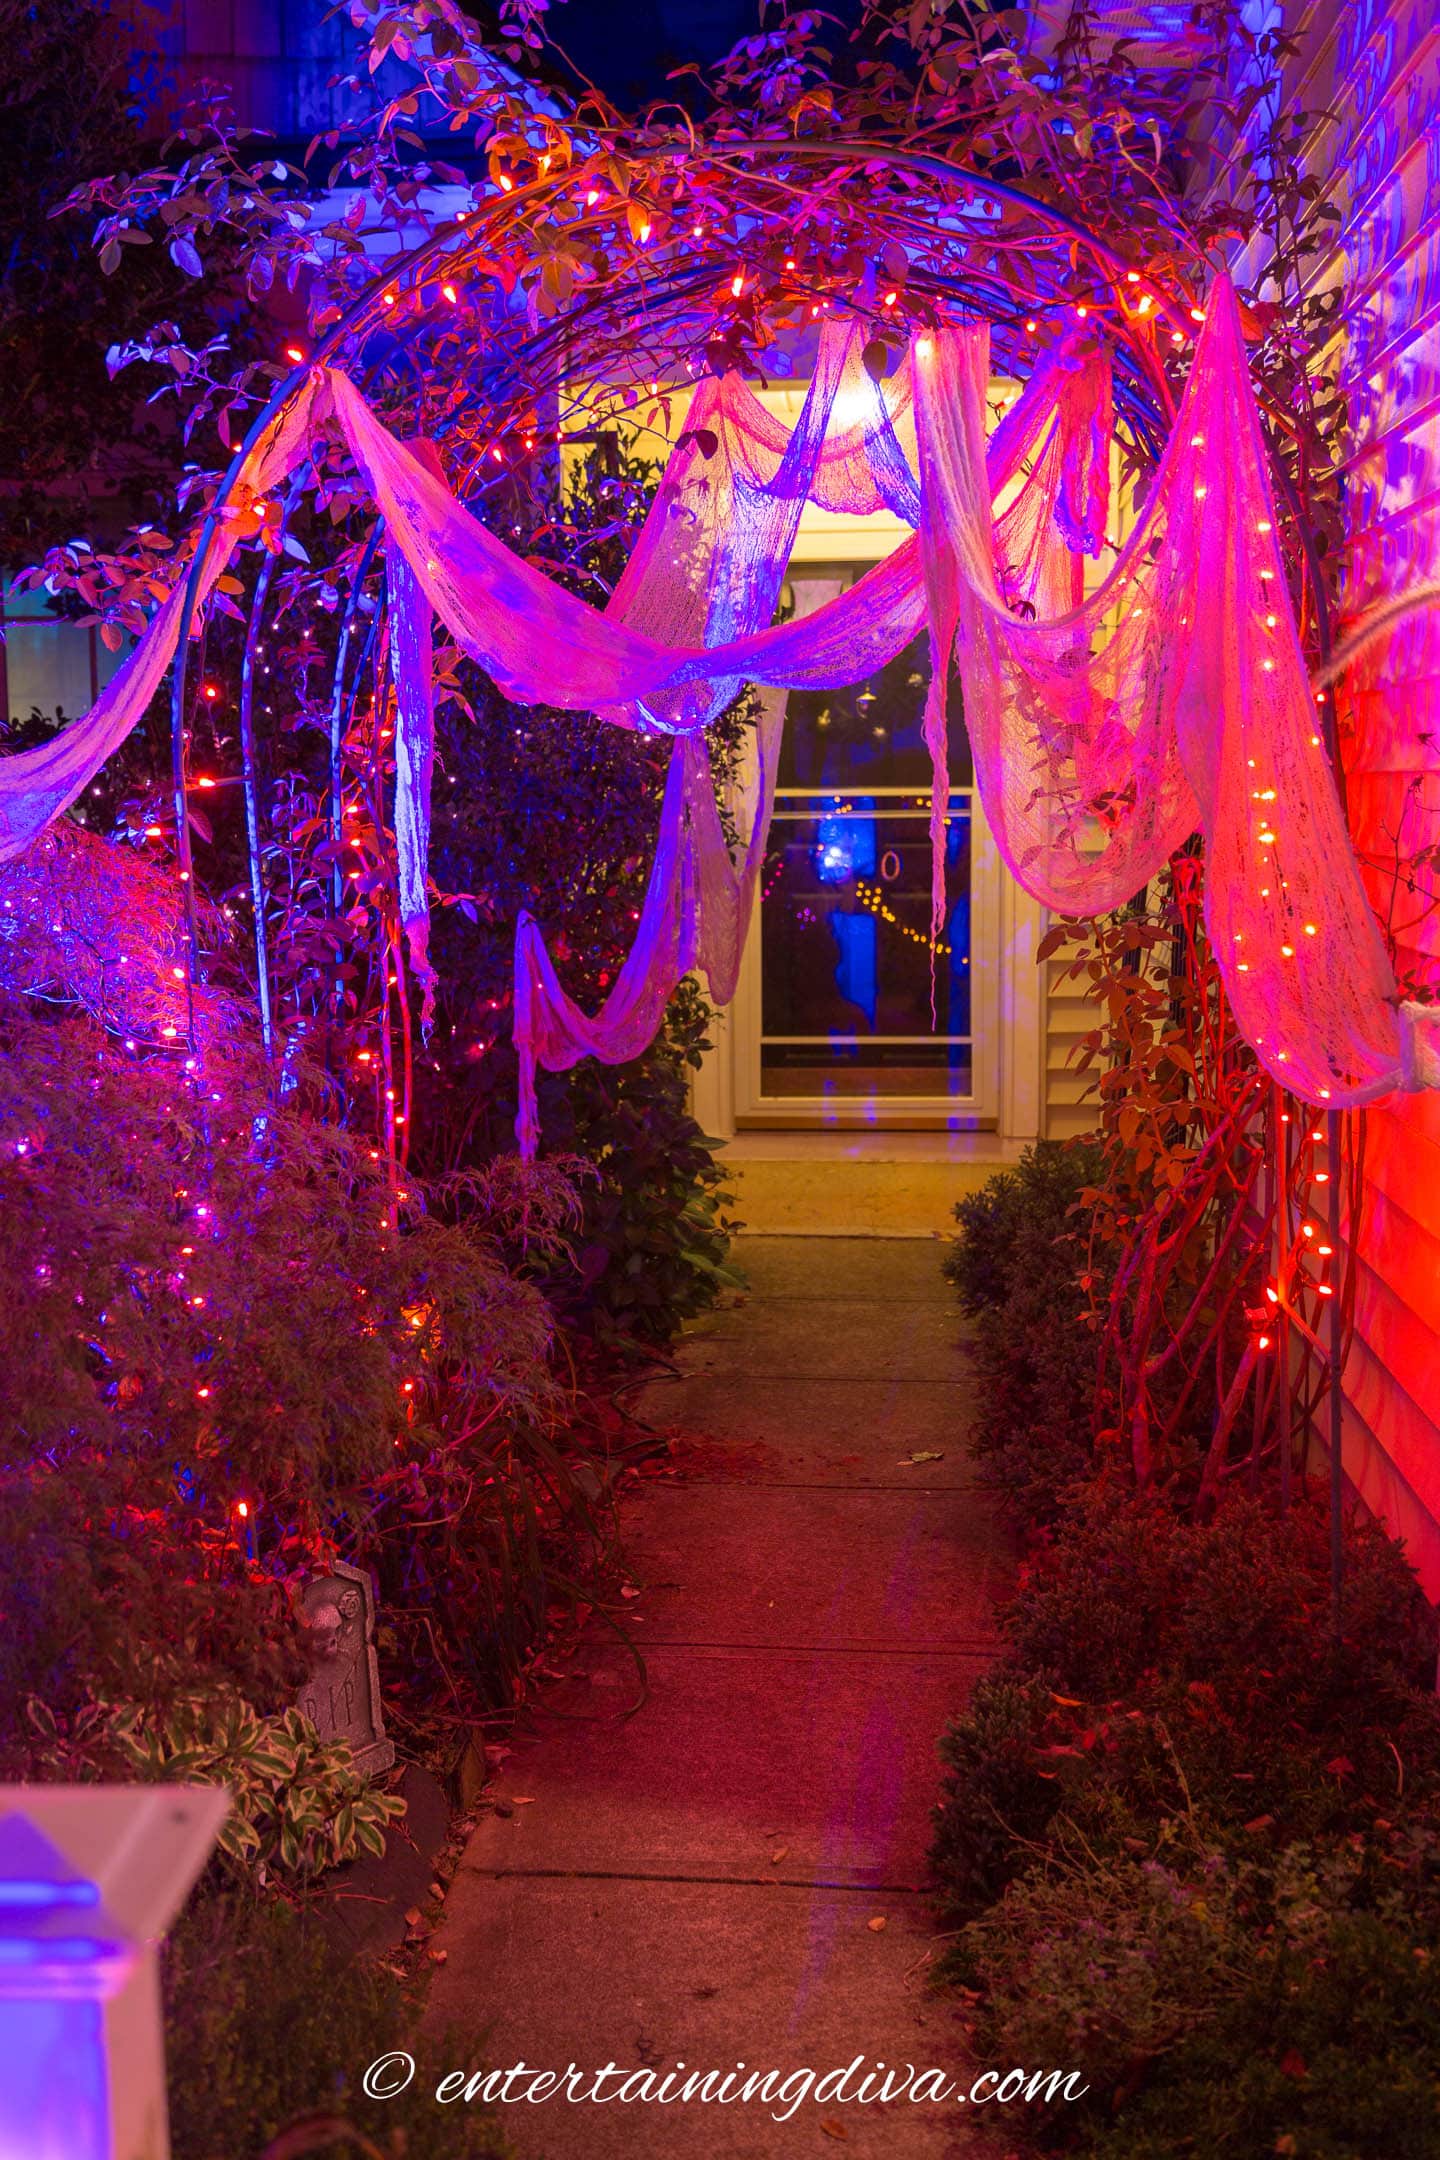 White creepy cloth hung on an arbor with string lights